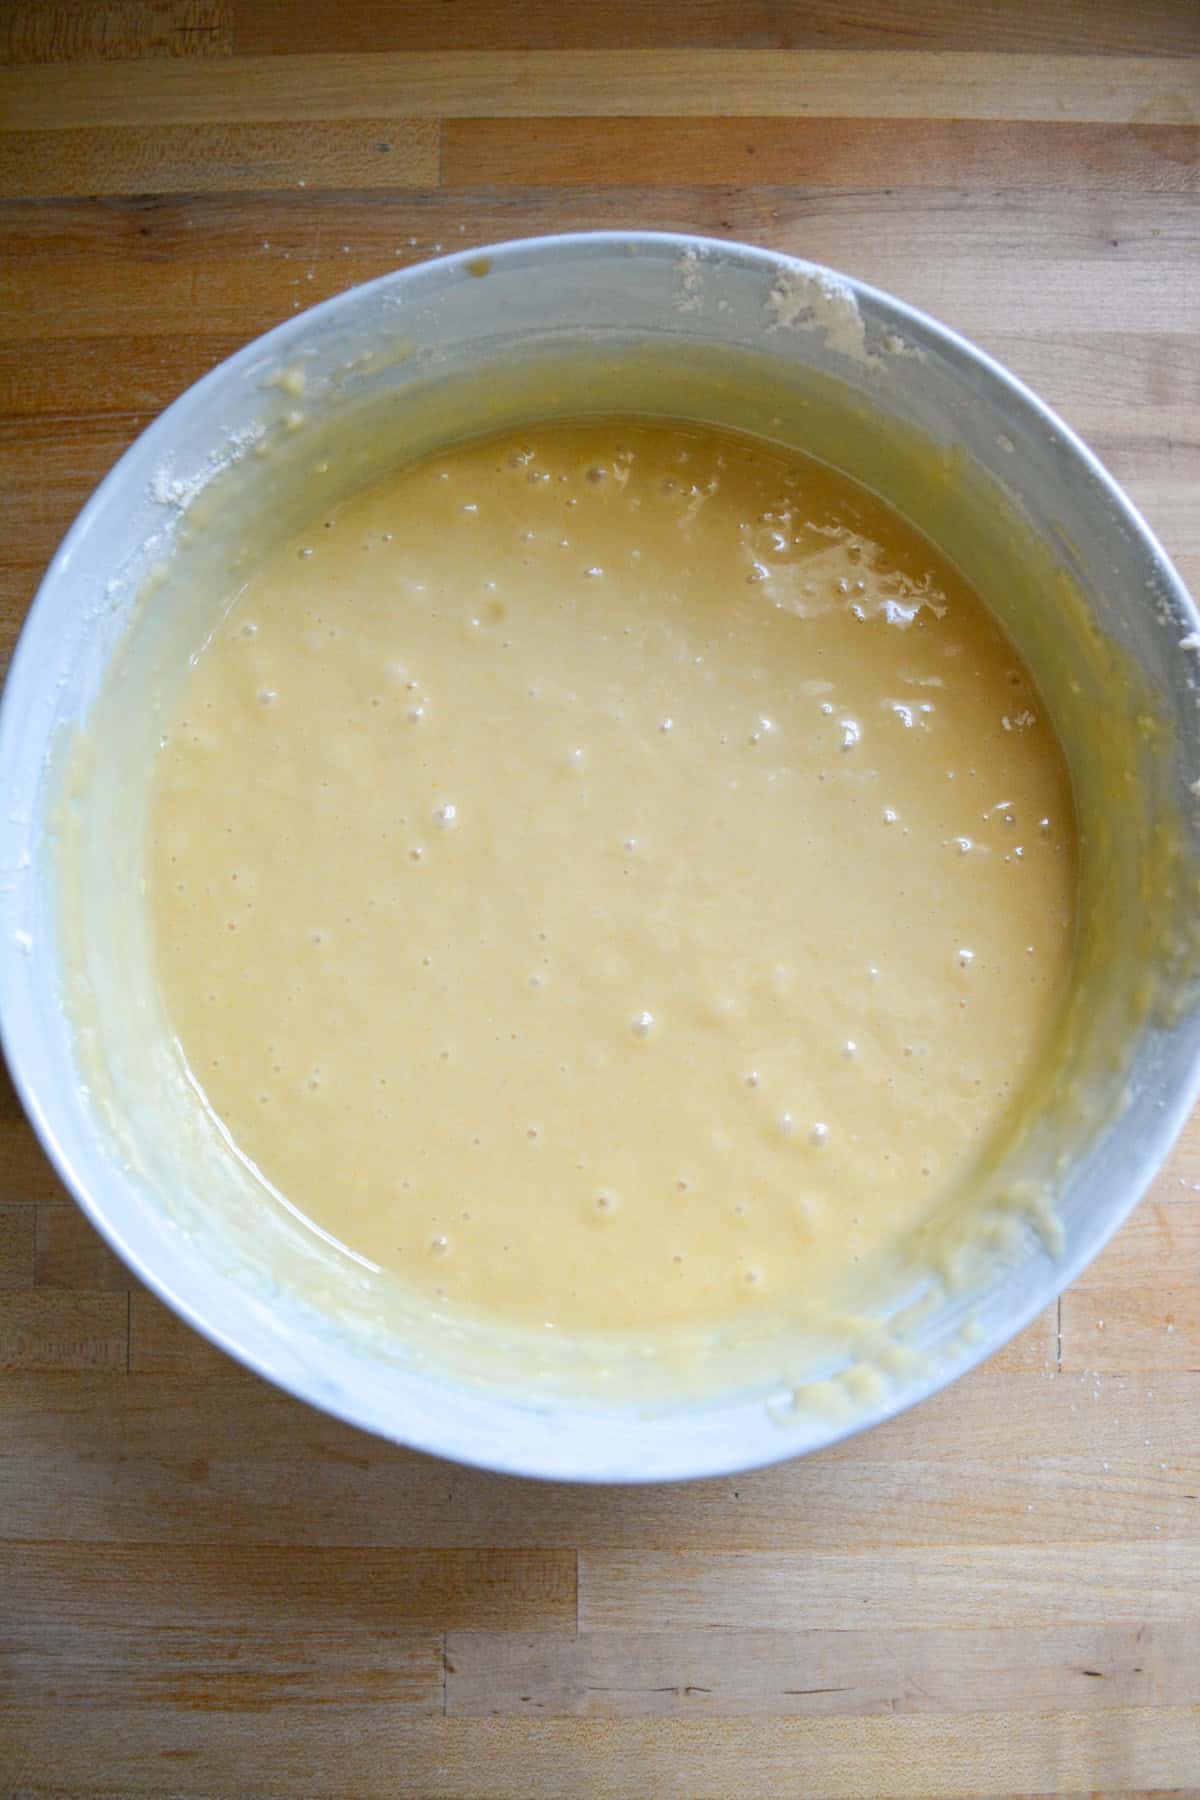 Vegan Yellow Cake batter in a mixing bowl on a wooden surface.